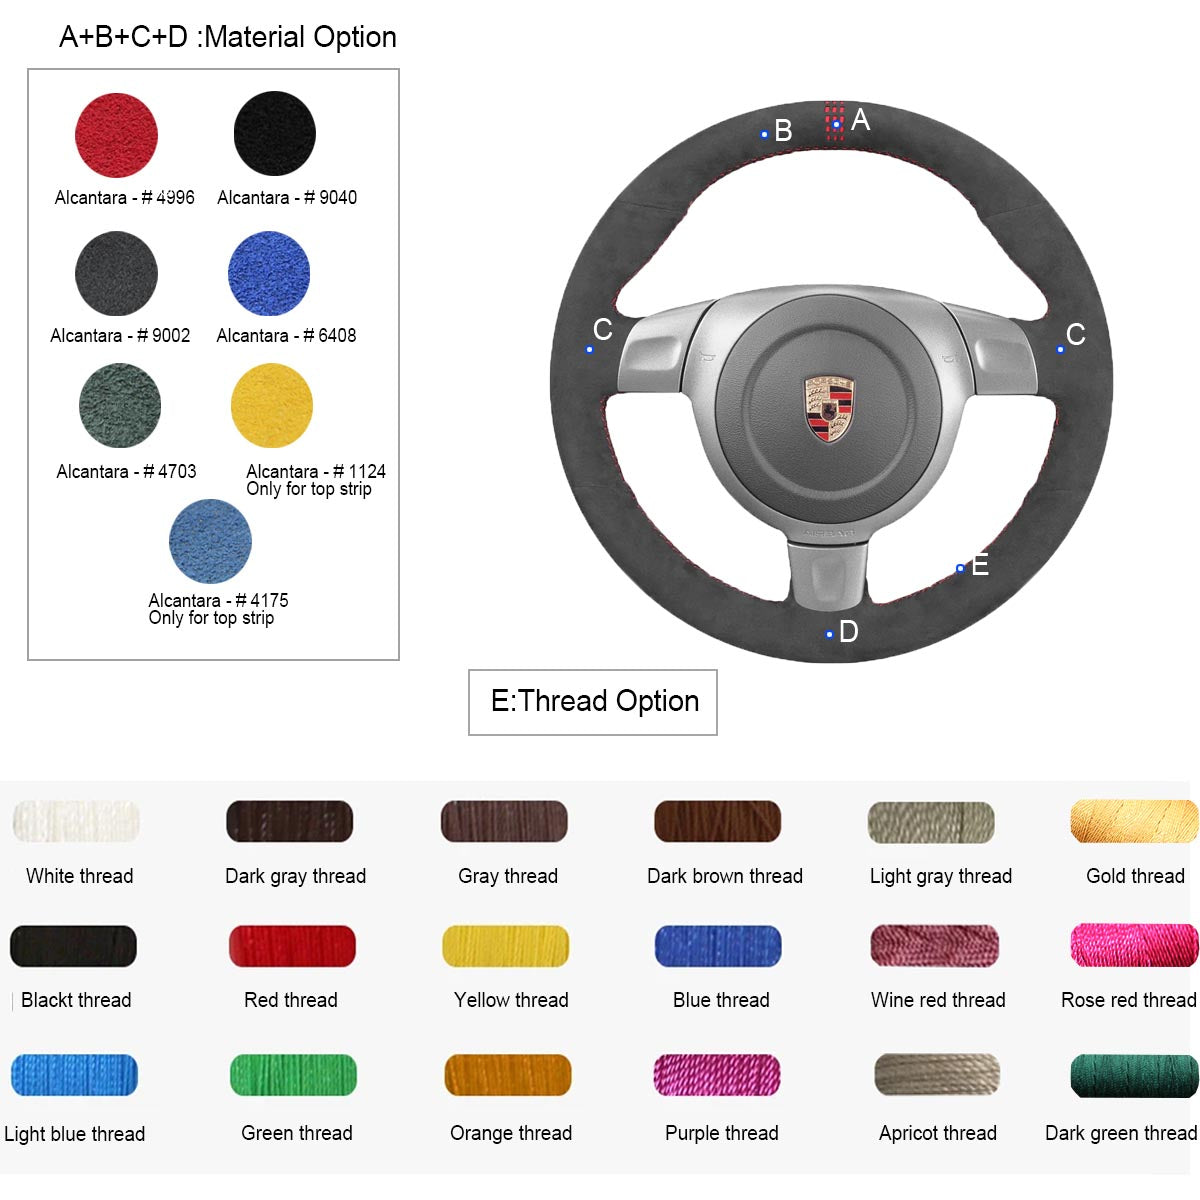 LQTENLEO Alcantara Leather Suede Hand-stitched Car Steering Wheel Cover Wrap for Porsche 911 (997) 2005-2009 / Boxster (987) 2005-2009 / Cayman (987) 2006-2009